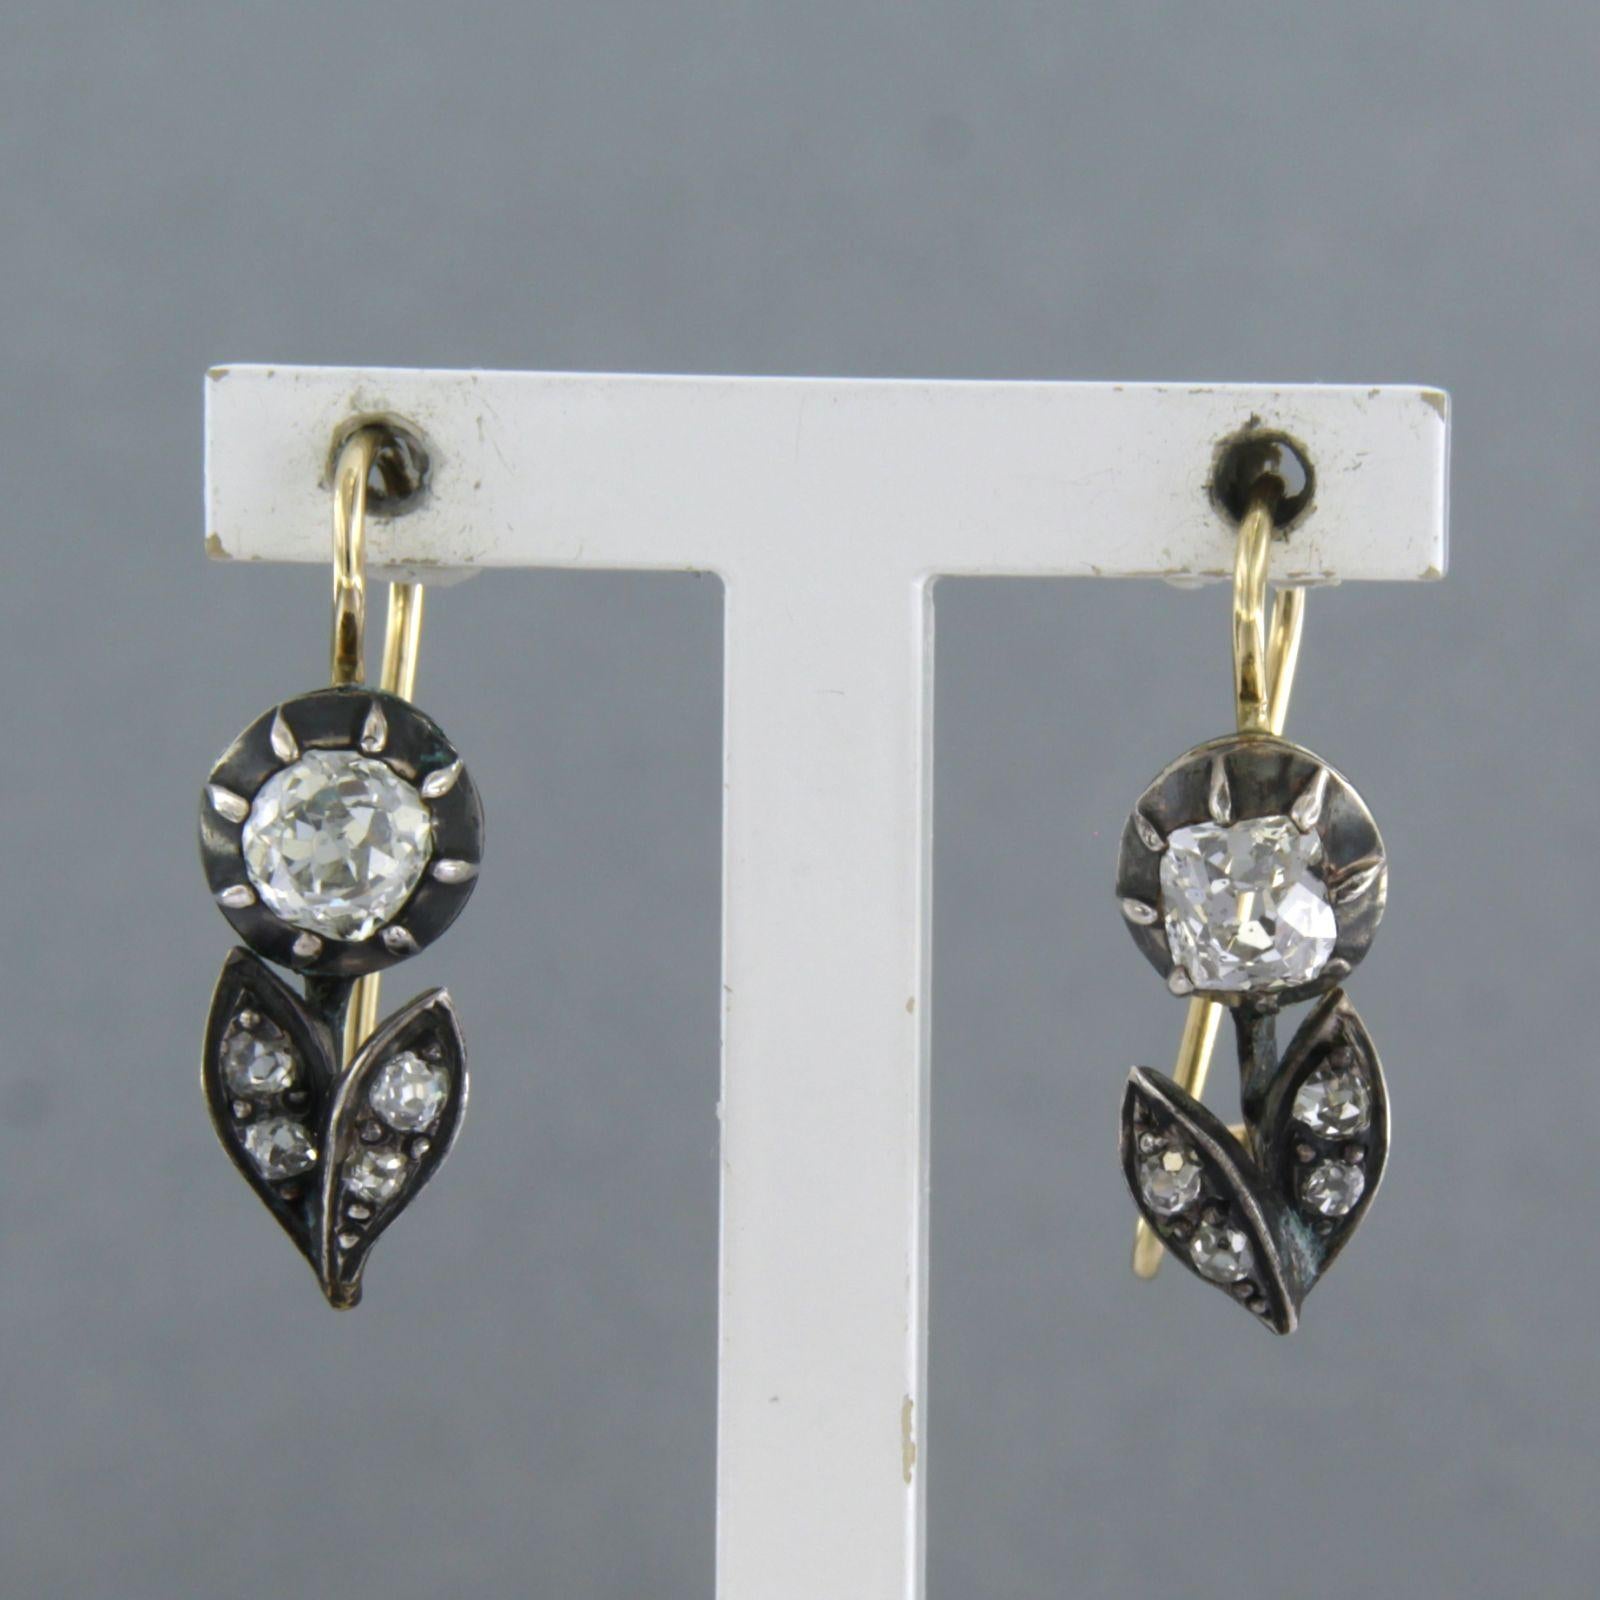 14k gold with silver earrings set with bolshevik cut diamonds. 1.10ct - F/G - SI/P

detailed description:

the top of the ear studs is 2.1 cm long by 6.7 mm wide

weight 3.0 grams

set with

- 2 x 4.5 mm x 4.5 mm bolshevik cut diamonds

color